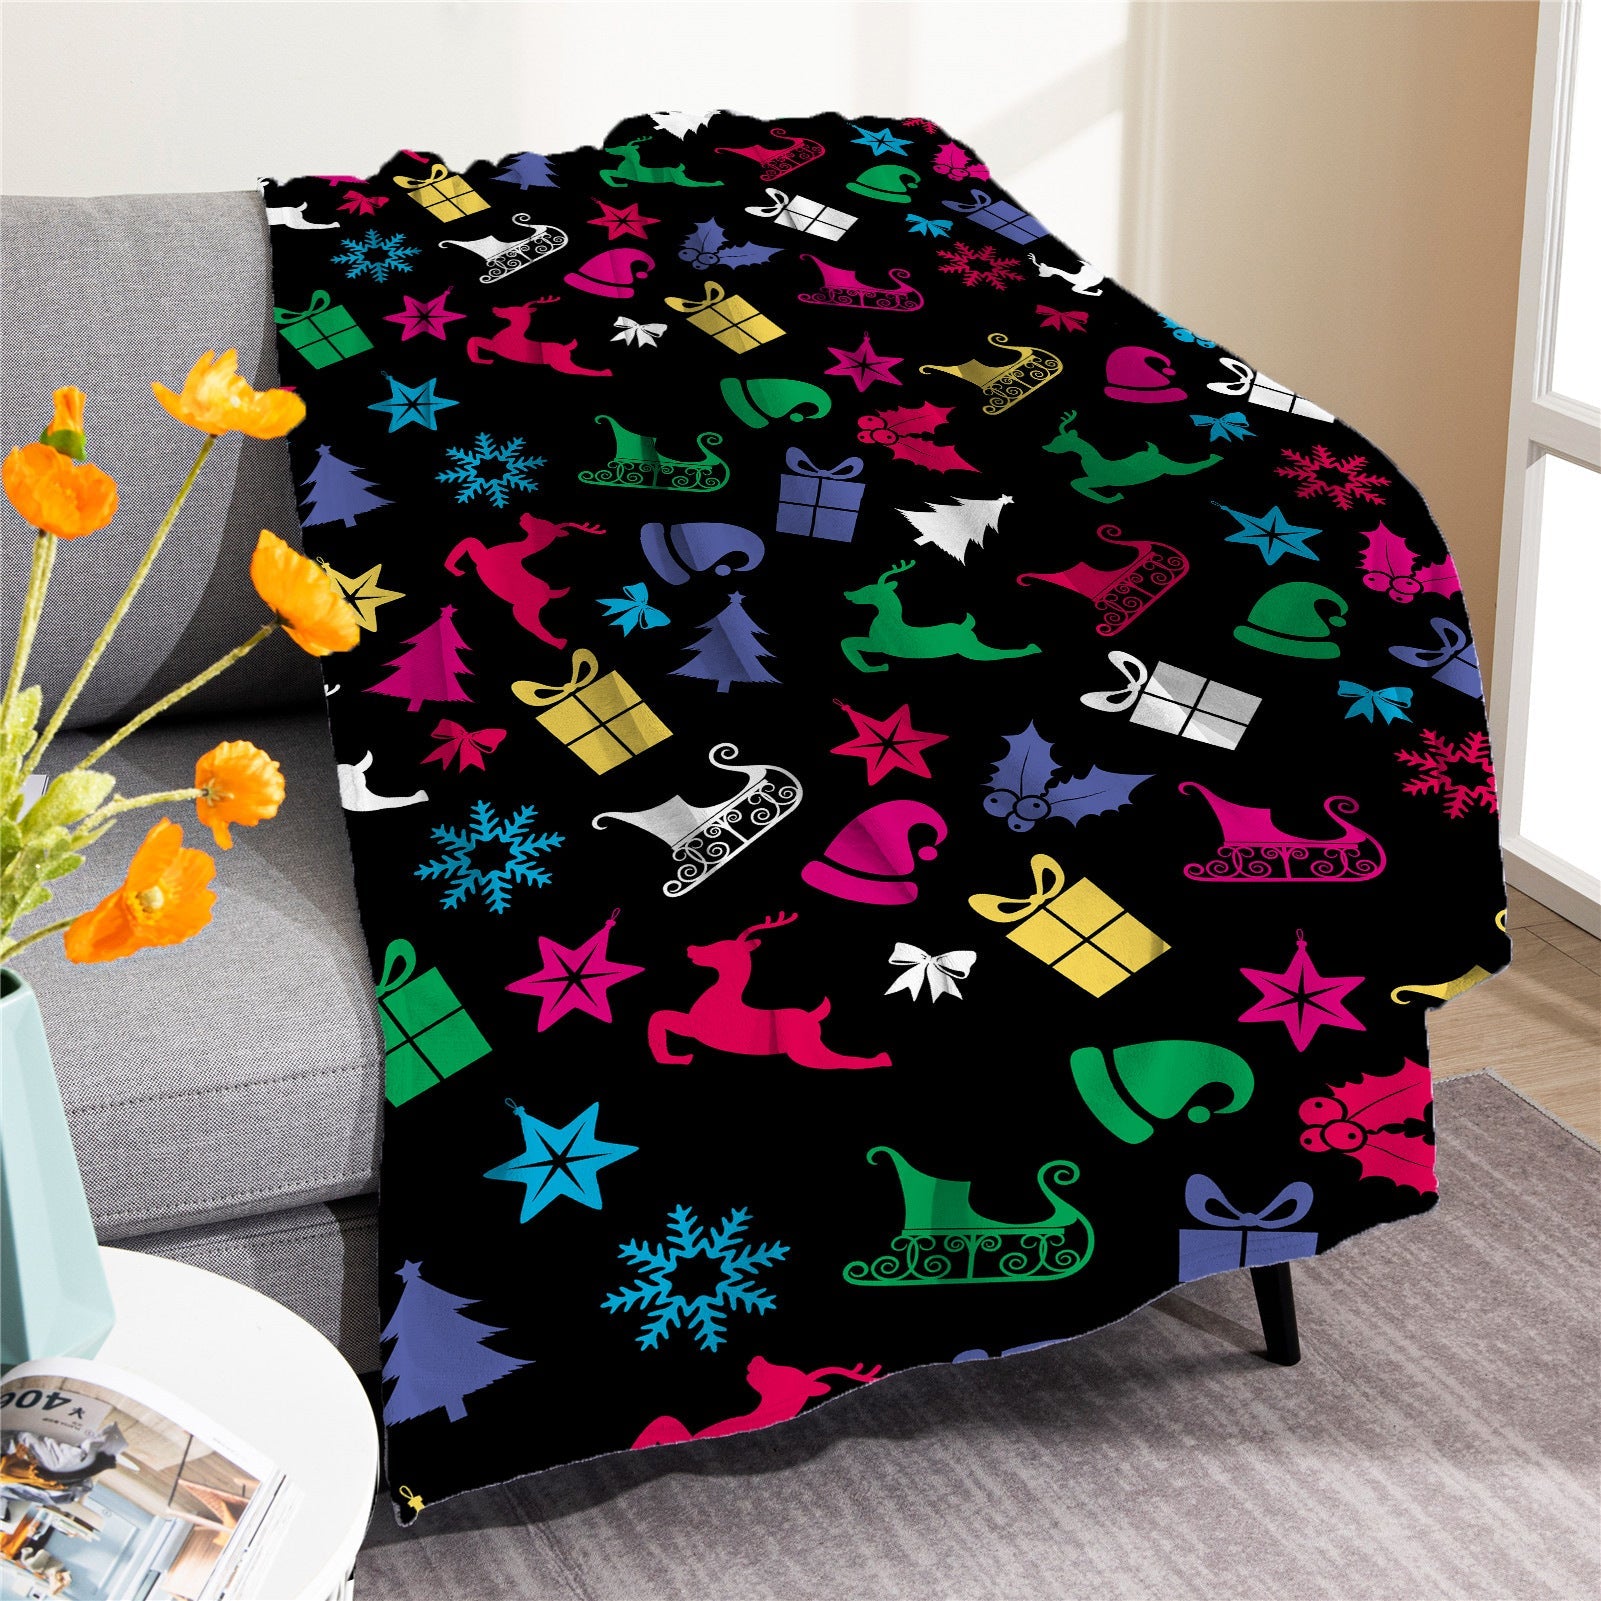 Merry Christmas Soft Fleece Throw Blankets-Blankets-M20220916-1-50*60 inches-Free Shipping at meselling99